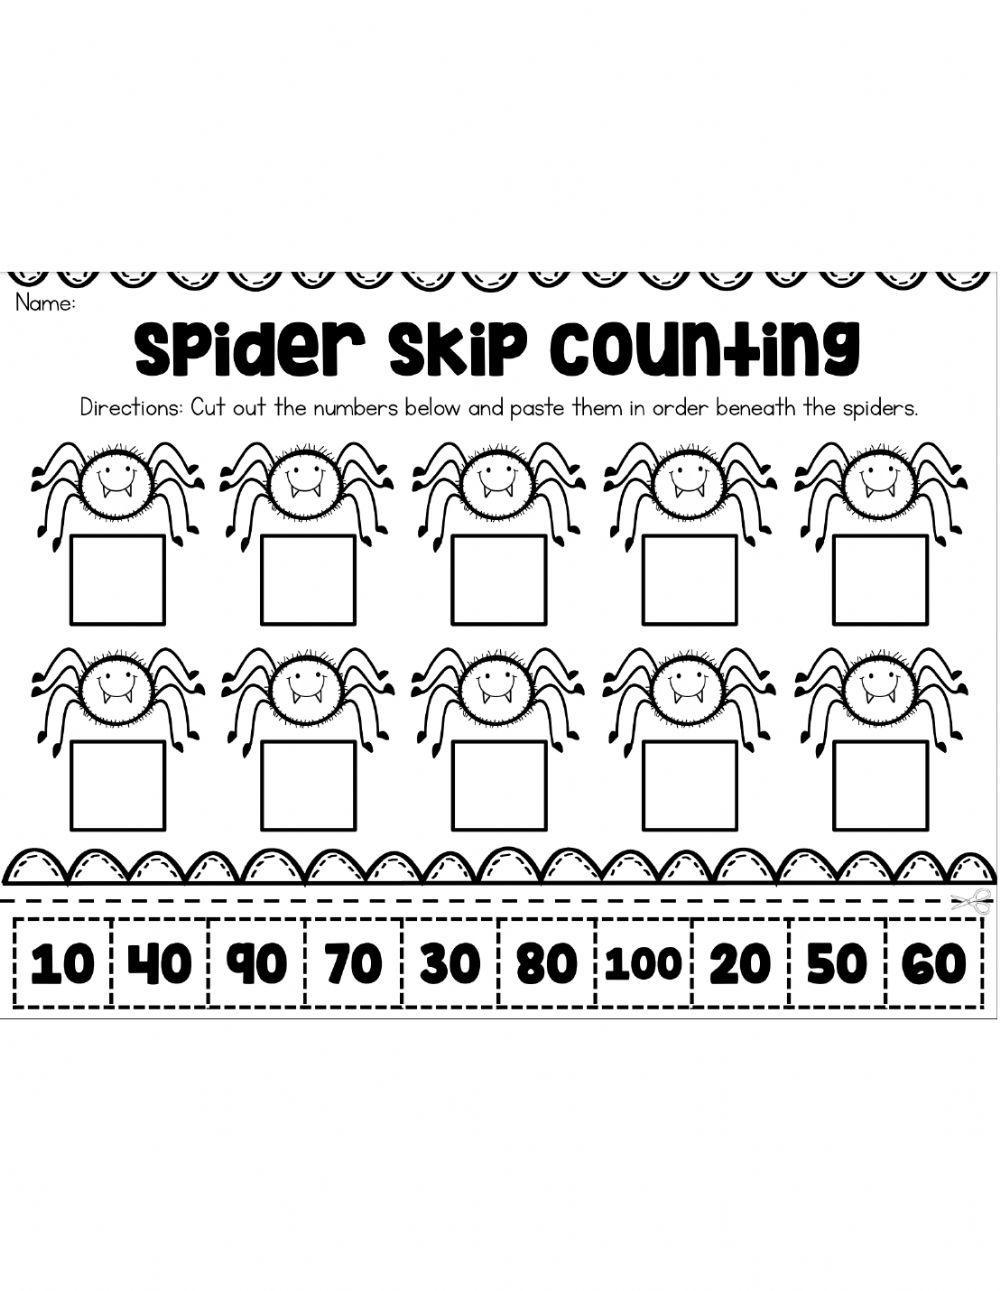 Counting by 10's Halloween Sheet